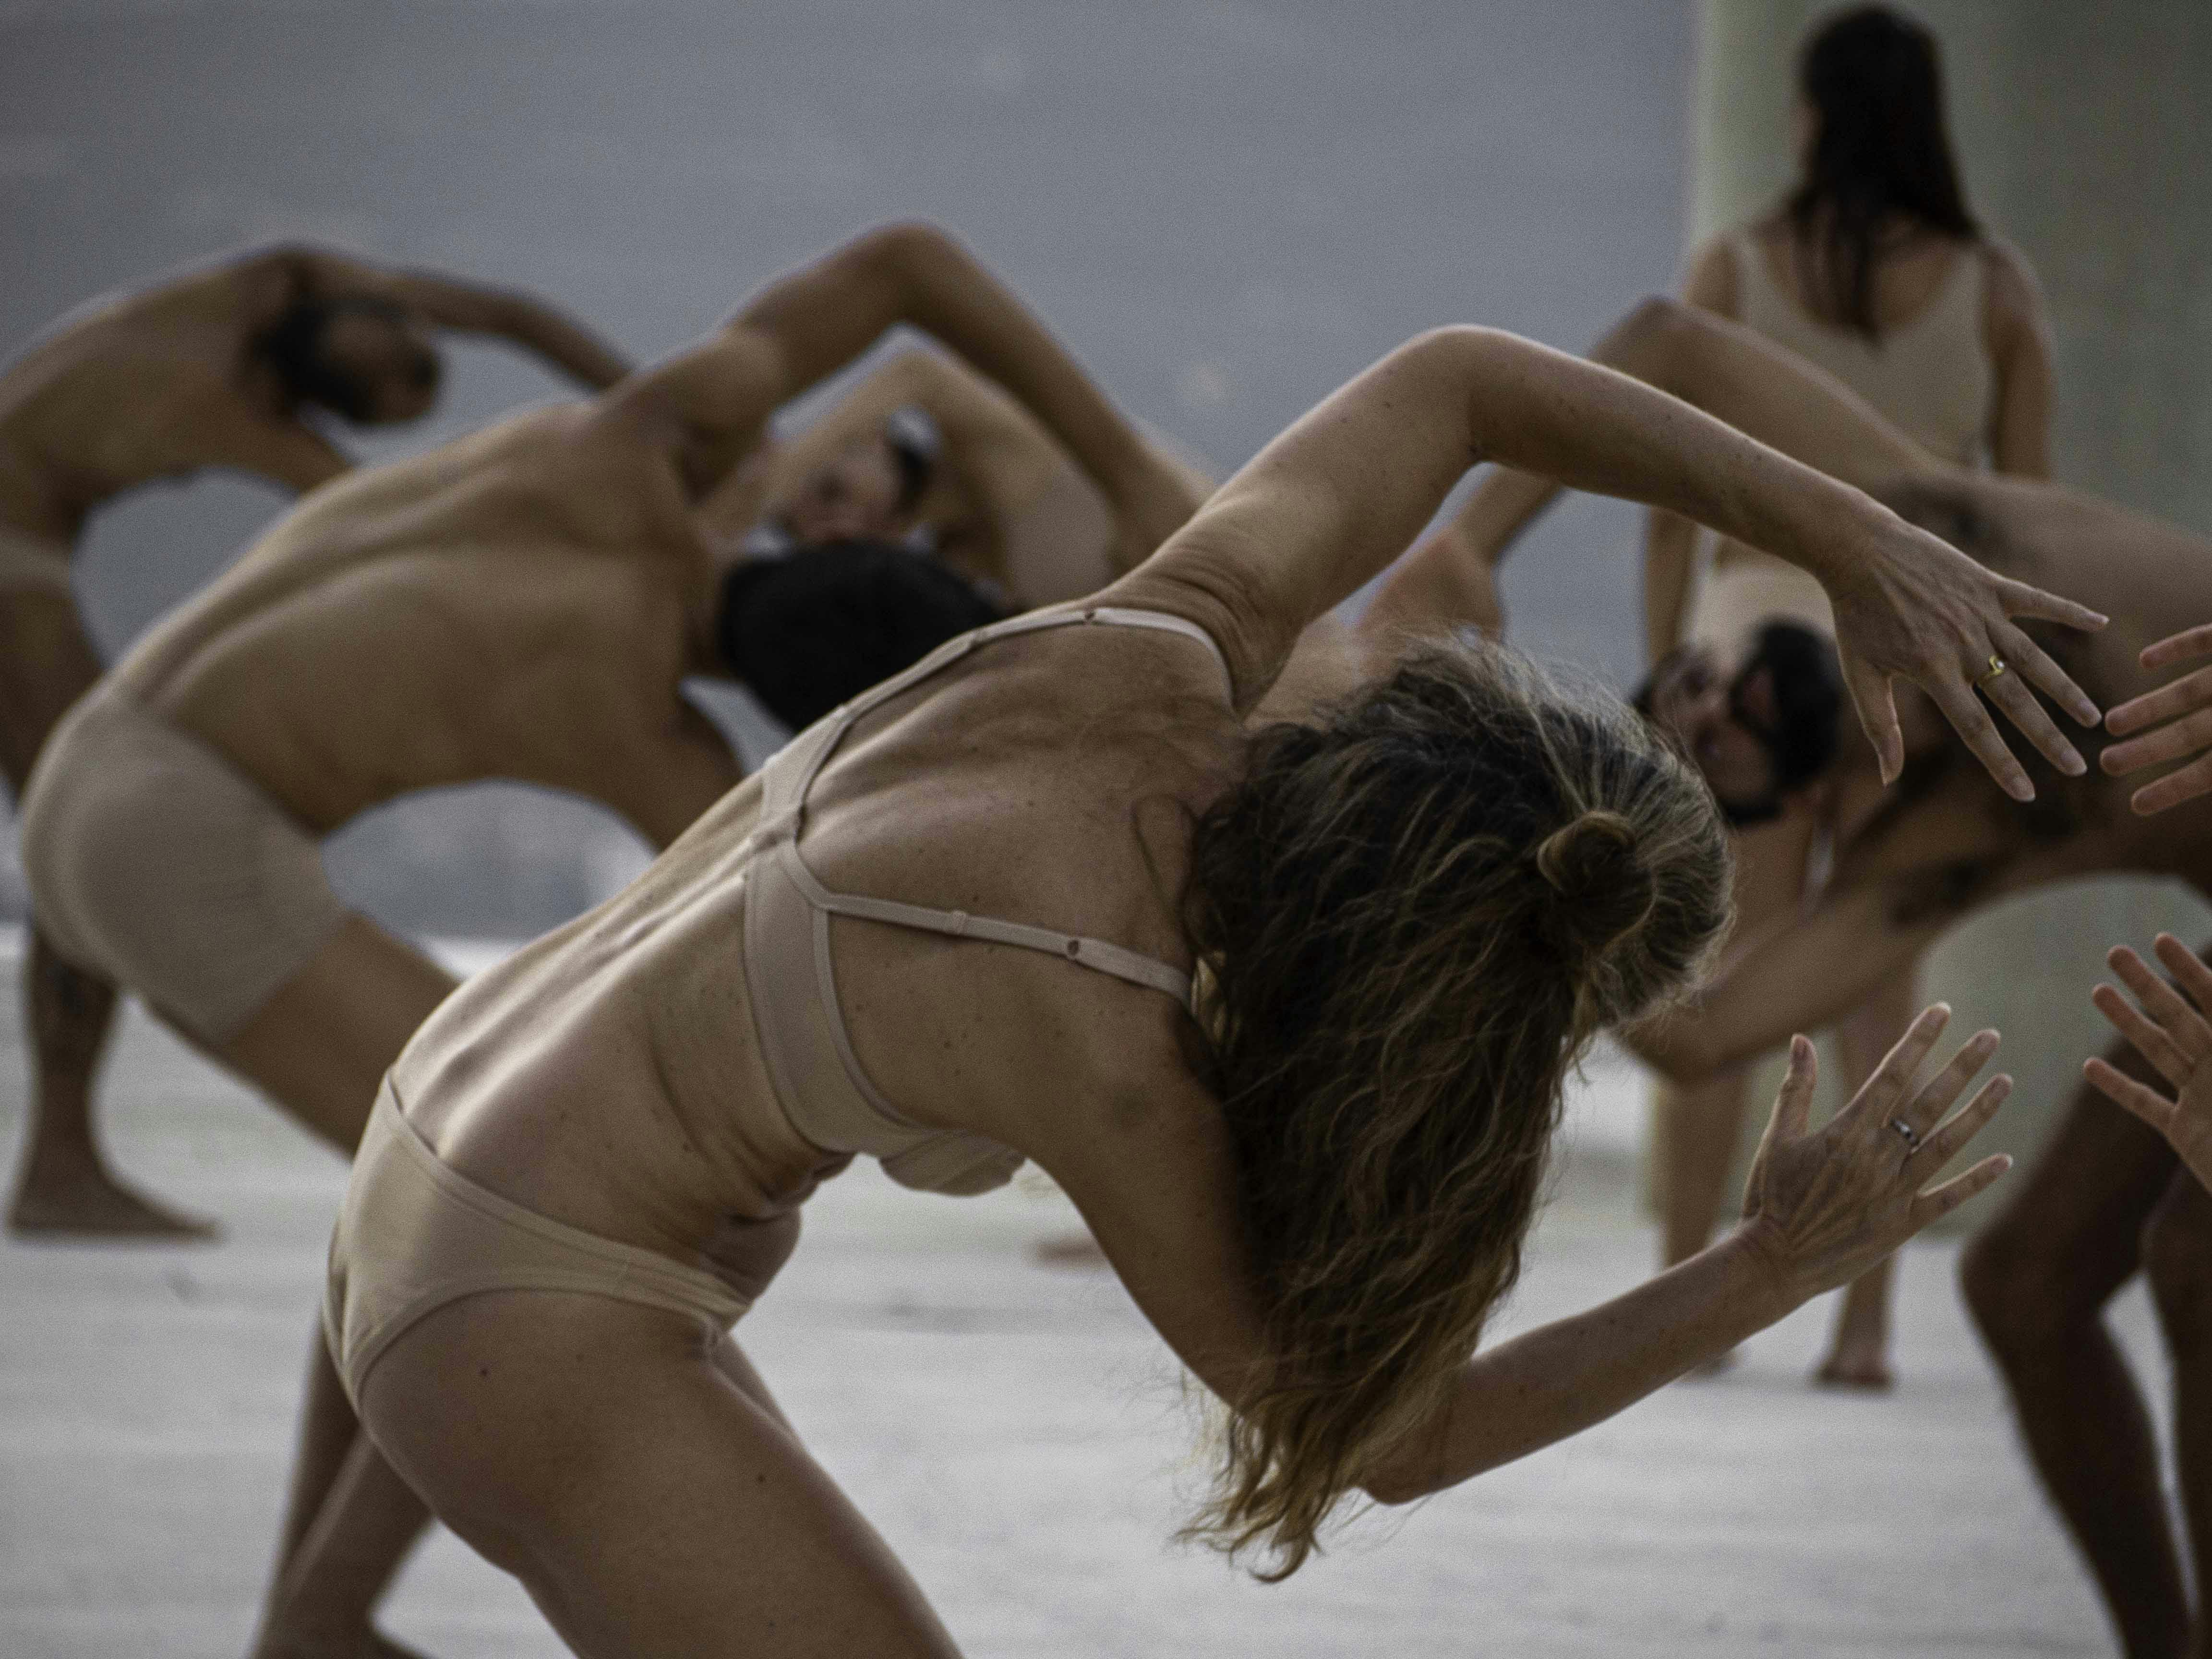 Several performers are seen with their backs to the camera, leaning forward with their torso and arms in a circle above their heads. They wear only flesh-colored underwear. The performance takes place outdoors.